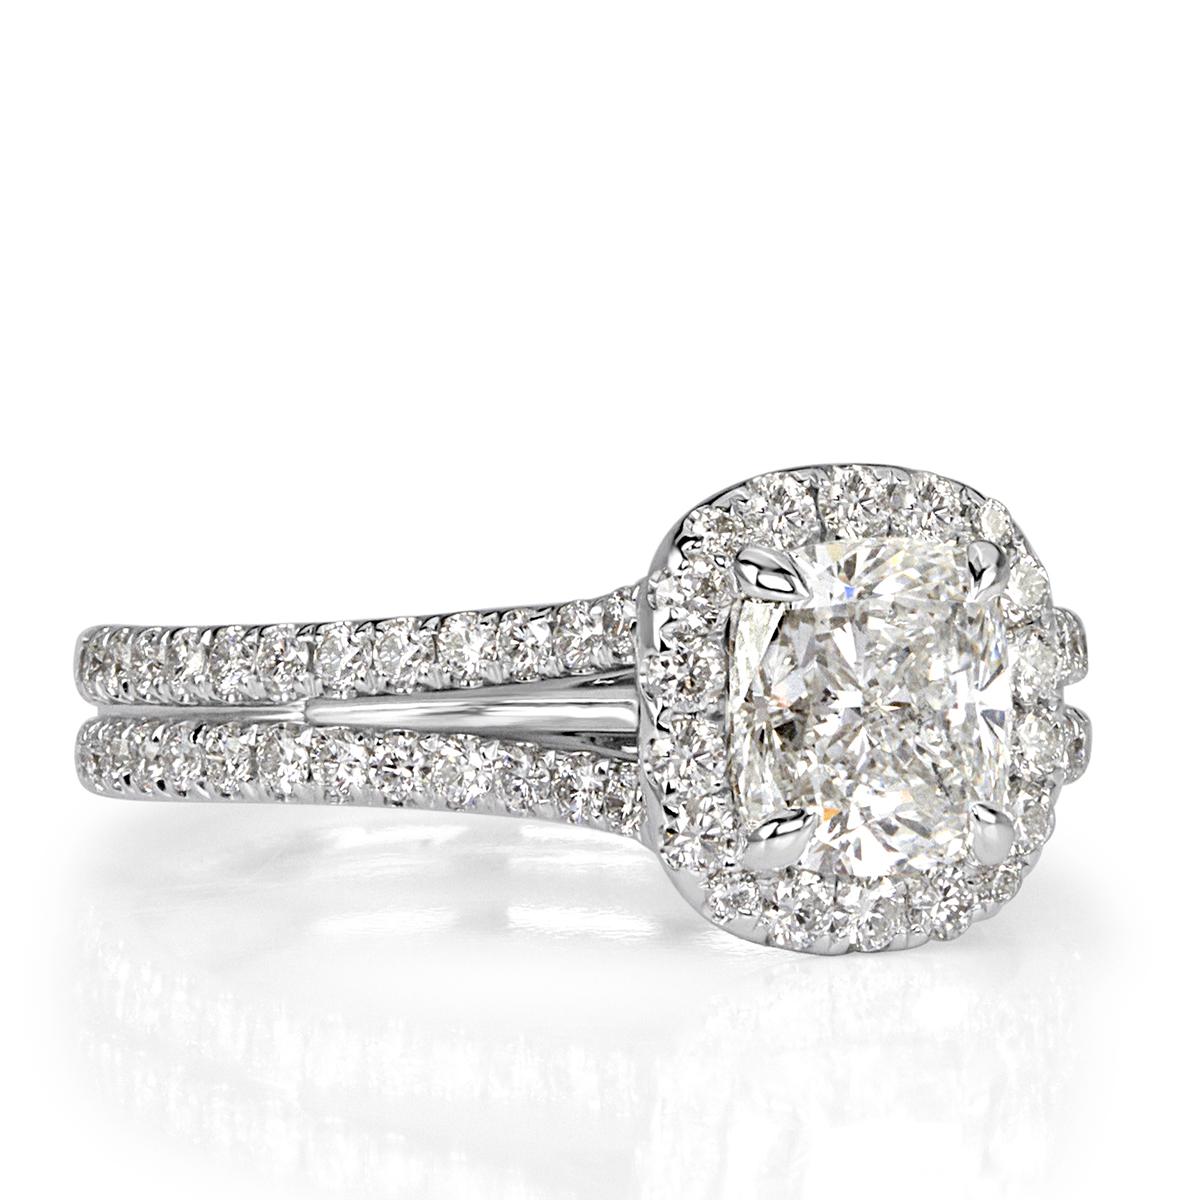 Custom made in high polish platinum, this stunning diamond engagement ring features a beautiful 1.01ct cushion cut center diamond, GIA certified at F-SI1. It is accented by a halo of round brilliant cut diamonds as well as one row of shimmering